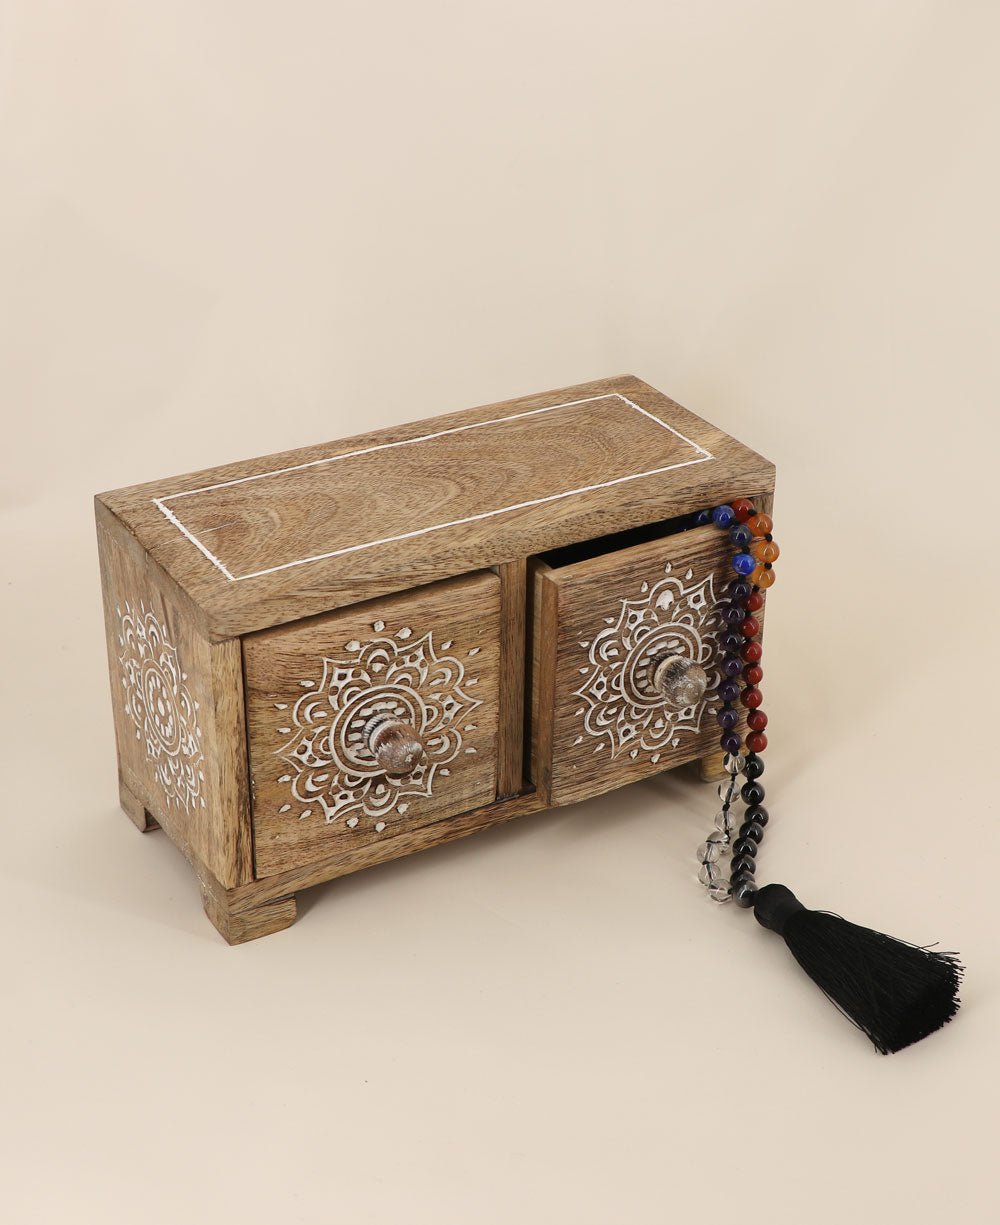 Small Tabletop Carved Wood Mandala Pedestal Riser With Drawers - Computer Risers & Stands - -